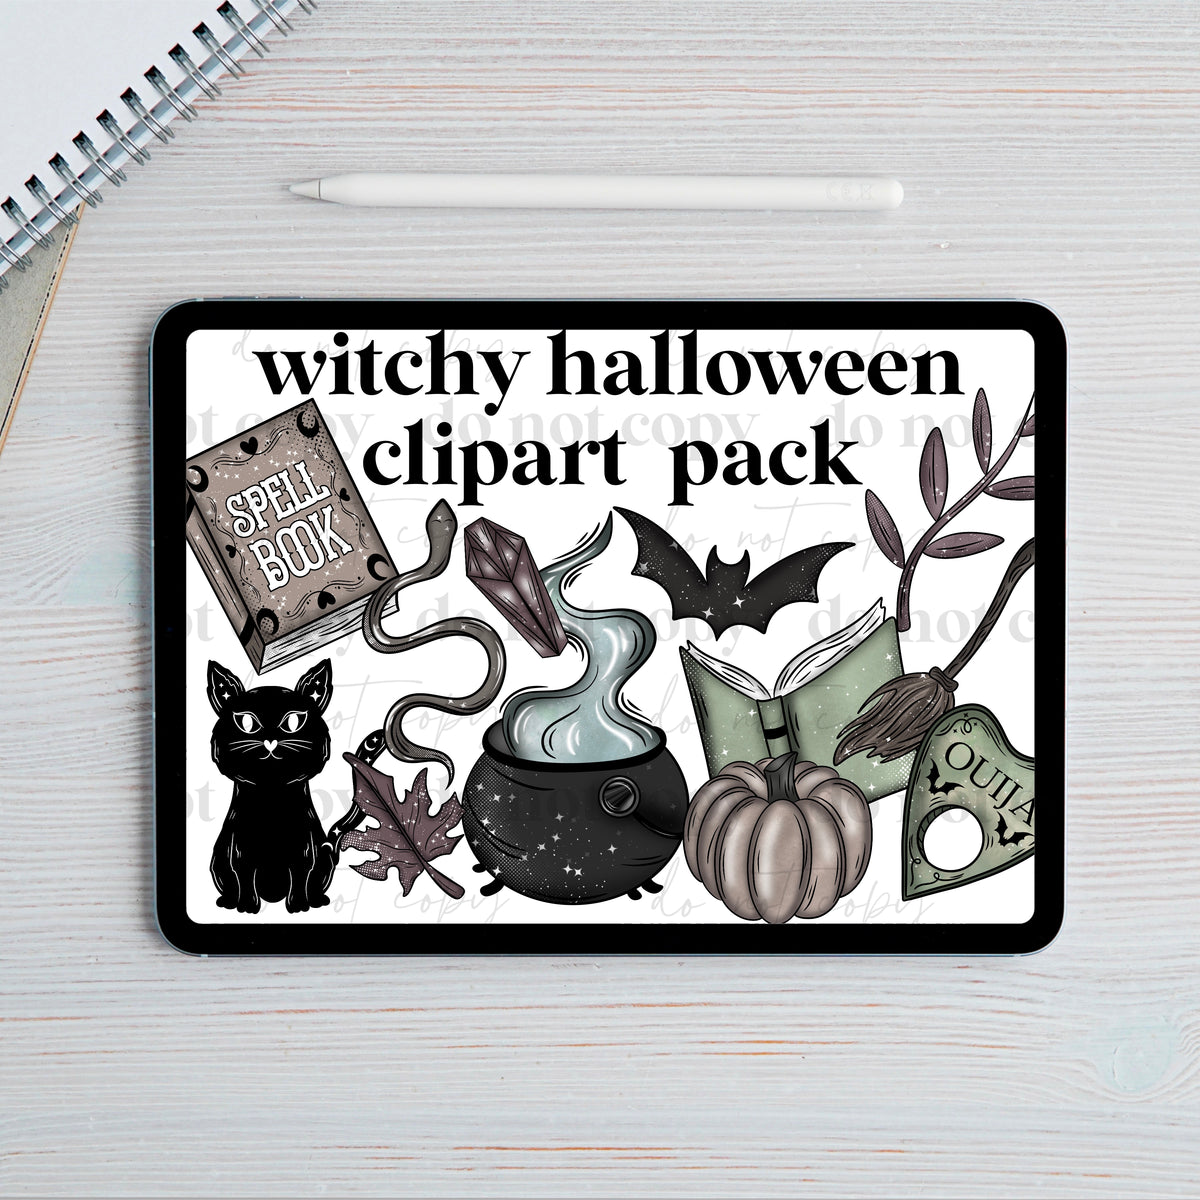 Witchy Halloween Clipart